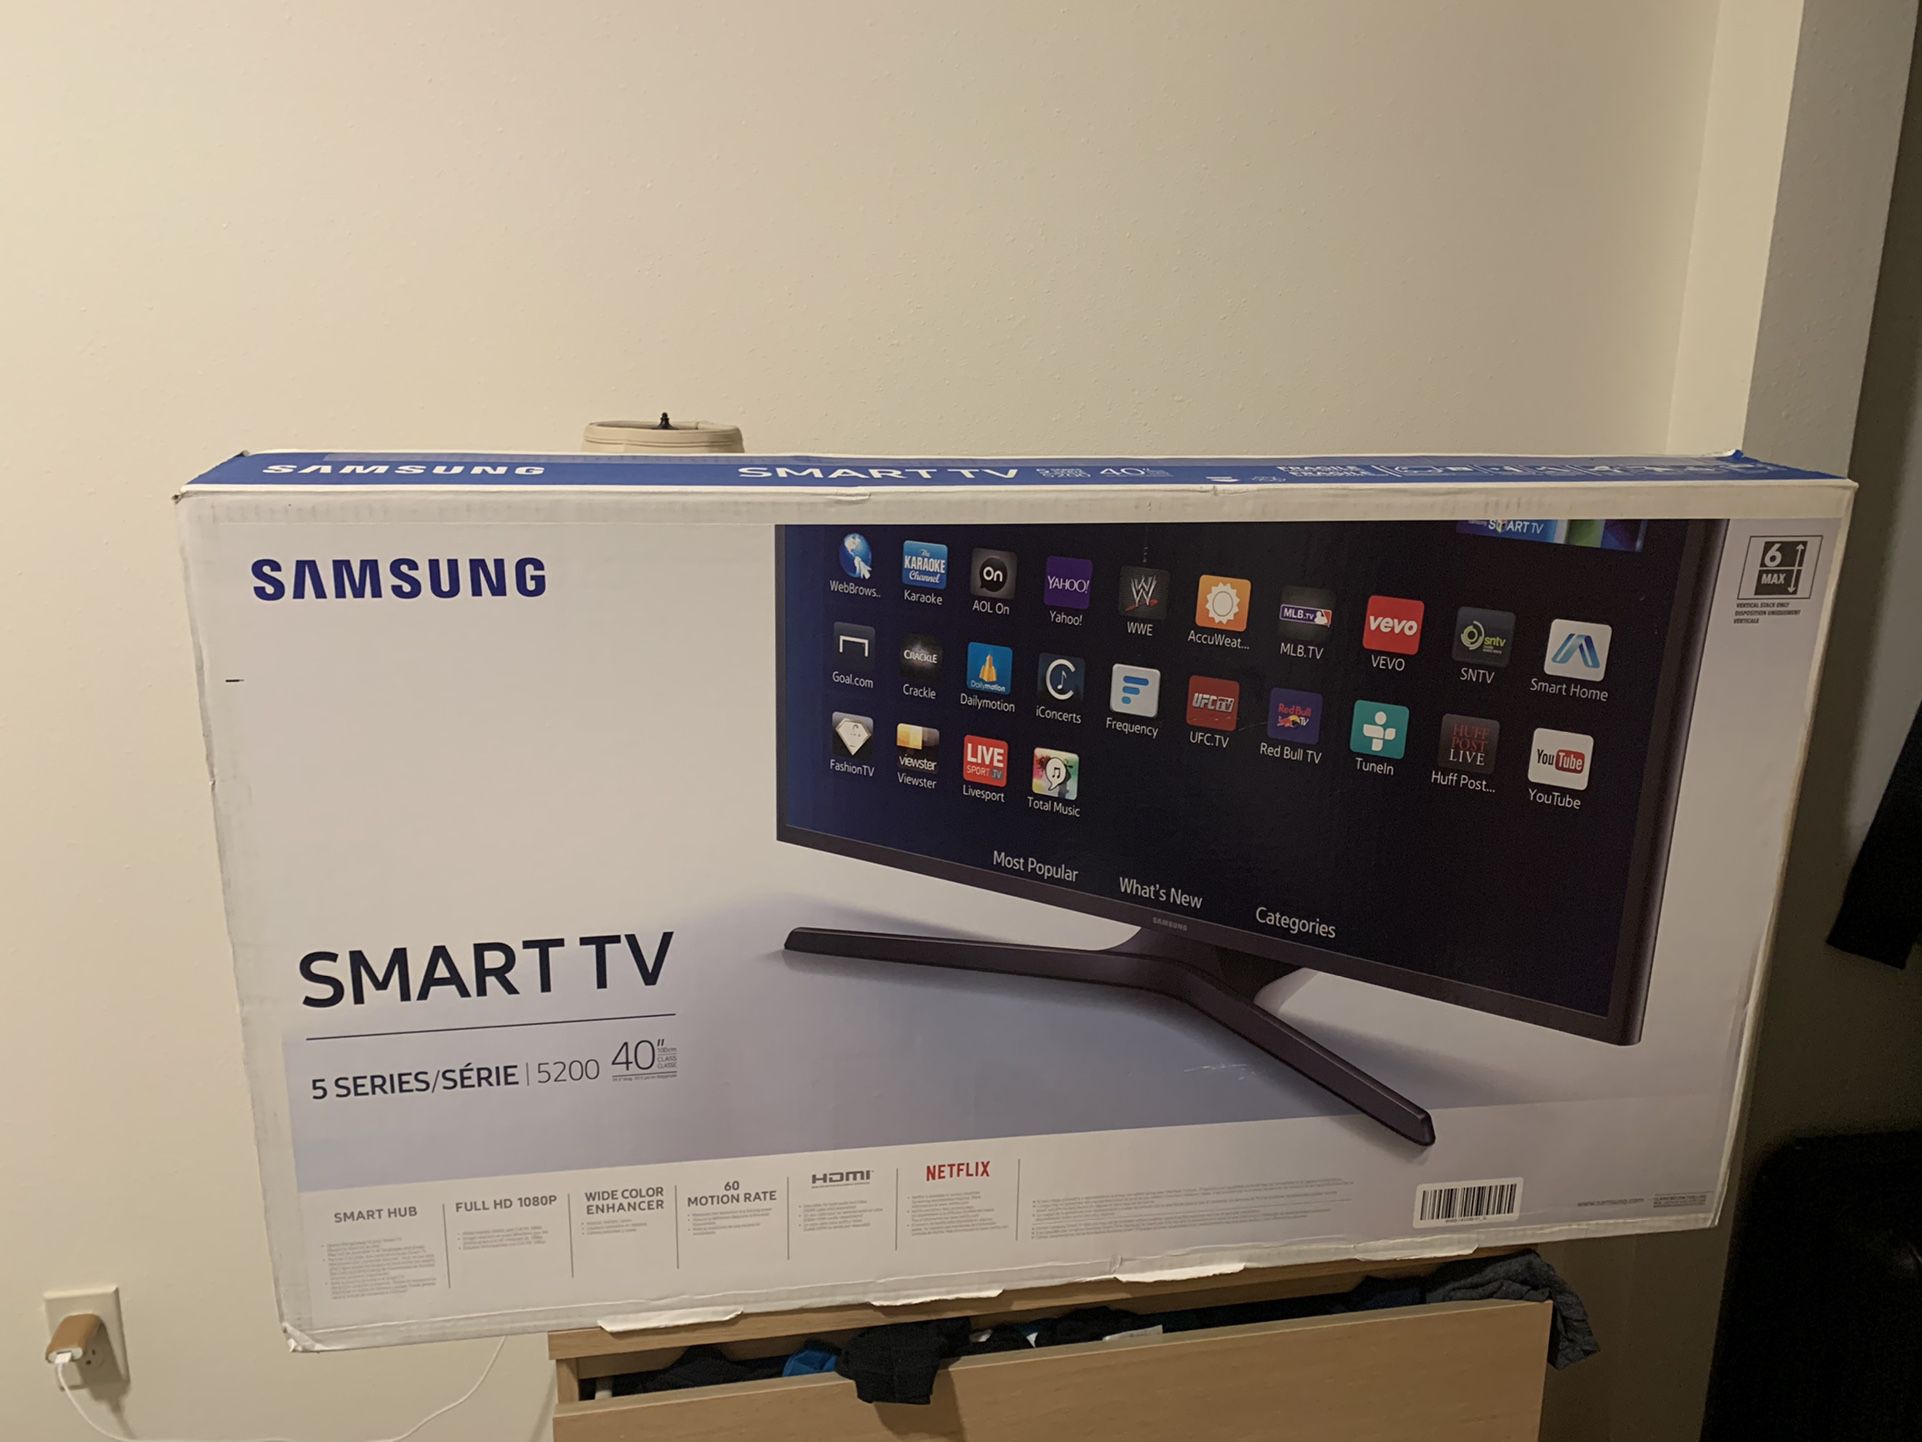 Samsung Smart Tv 5 series 5200 40” for Sale in WA - OfferUp